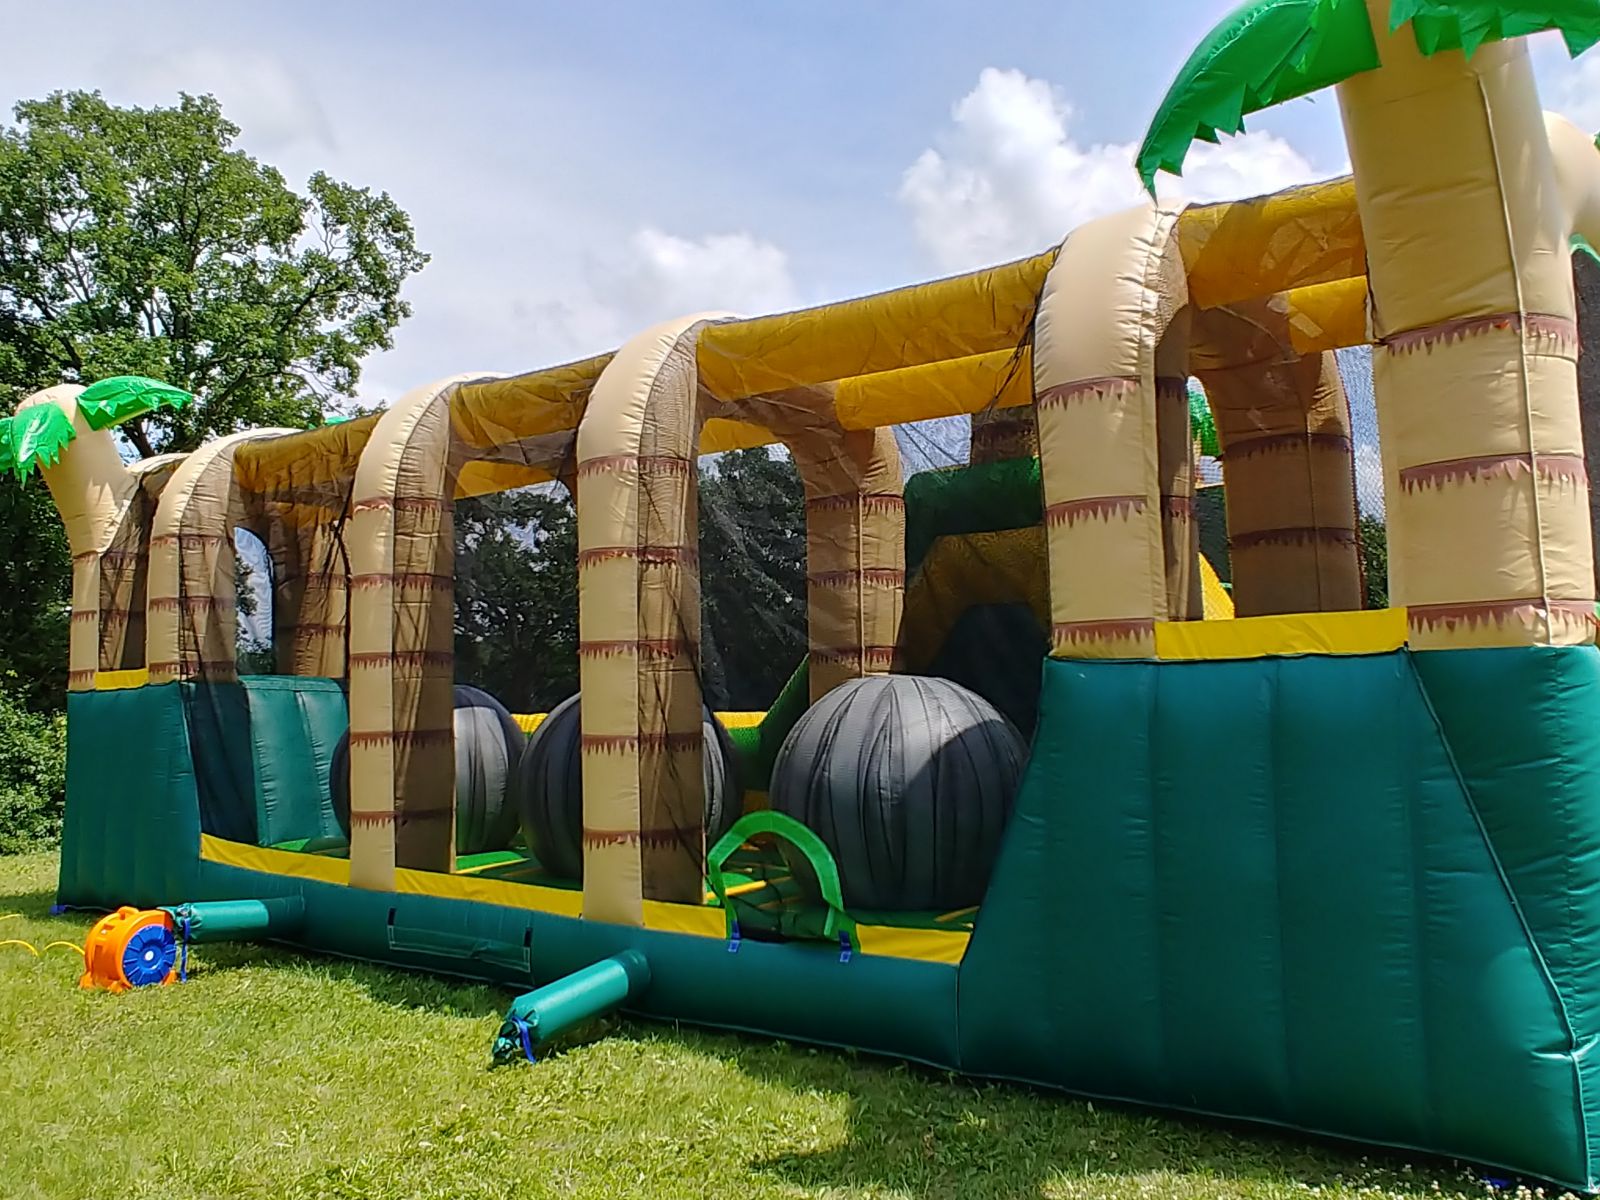 Giant inflatable ball challenge inside Hop N' Rock Obstacle Course